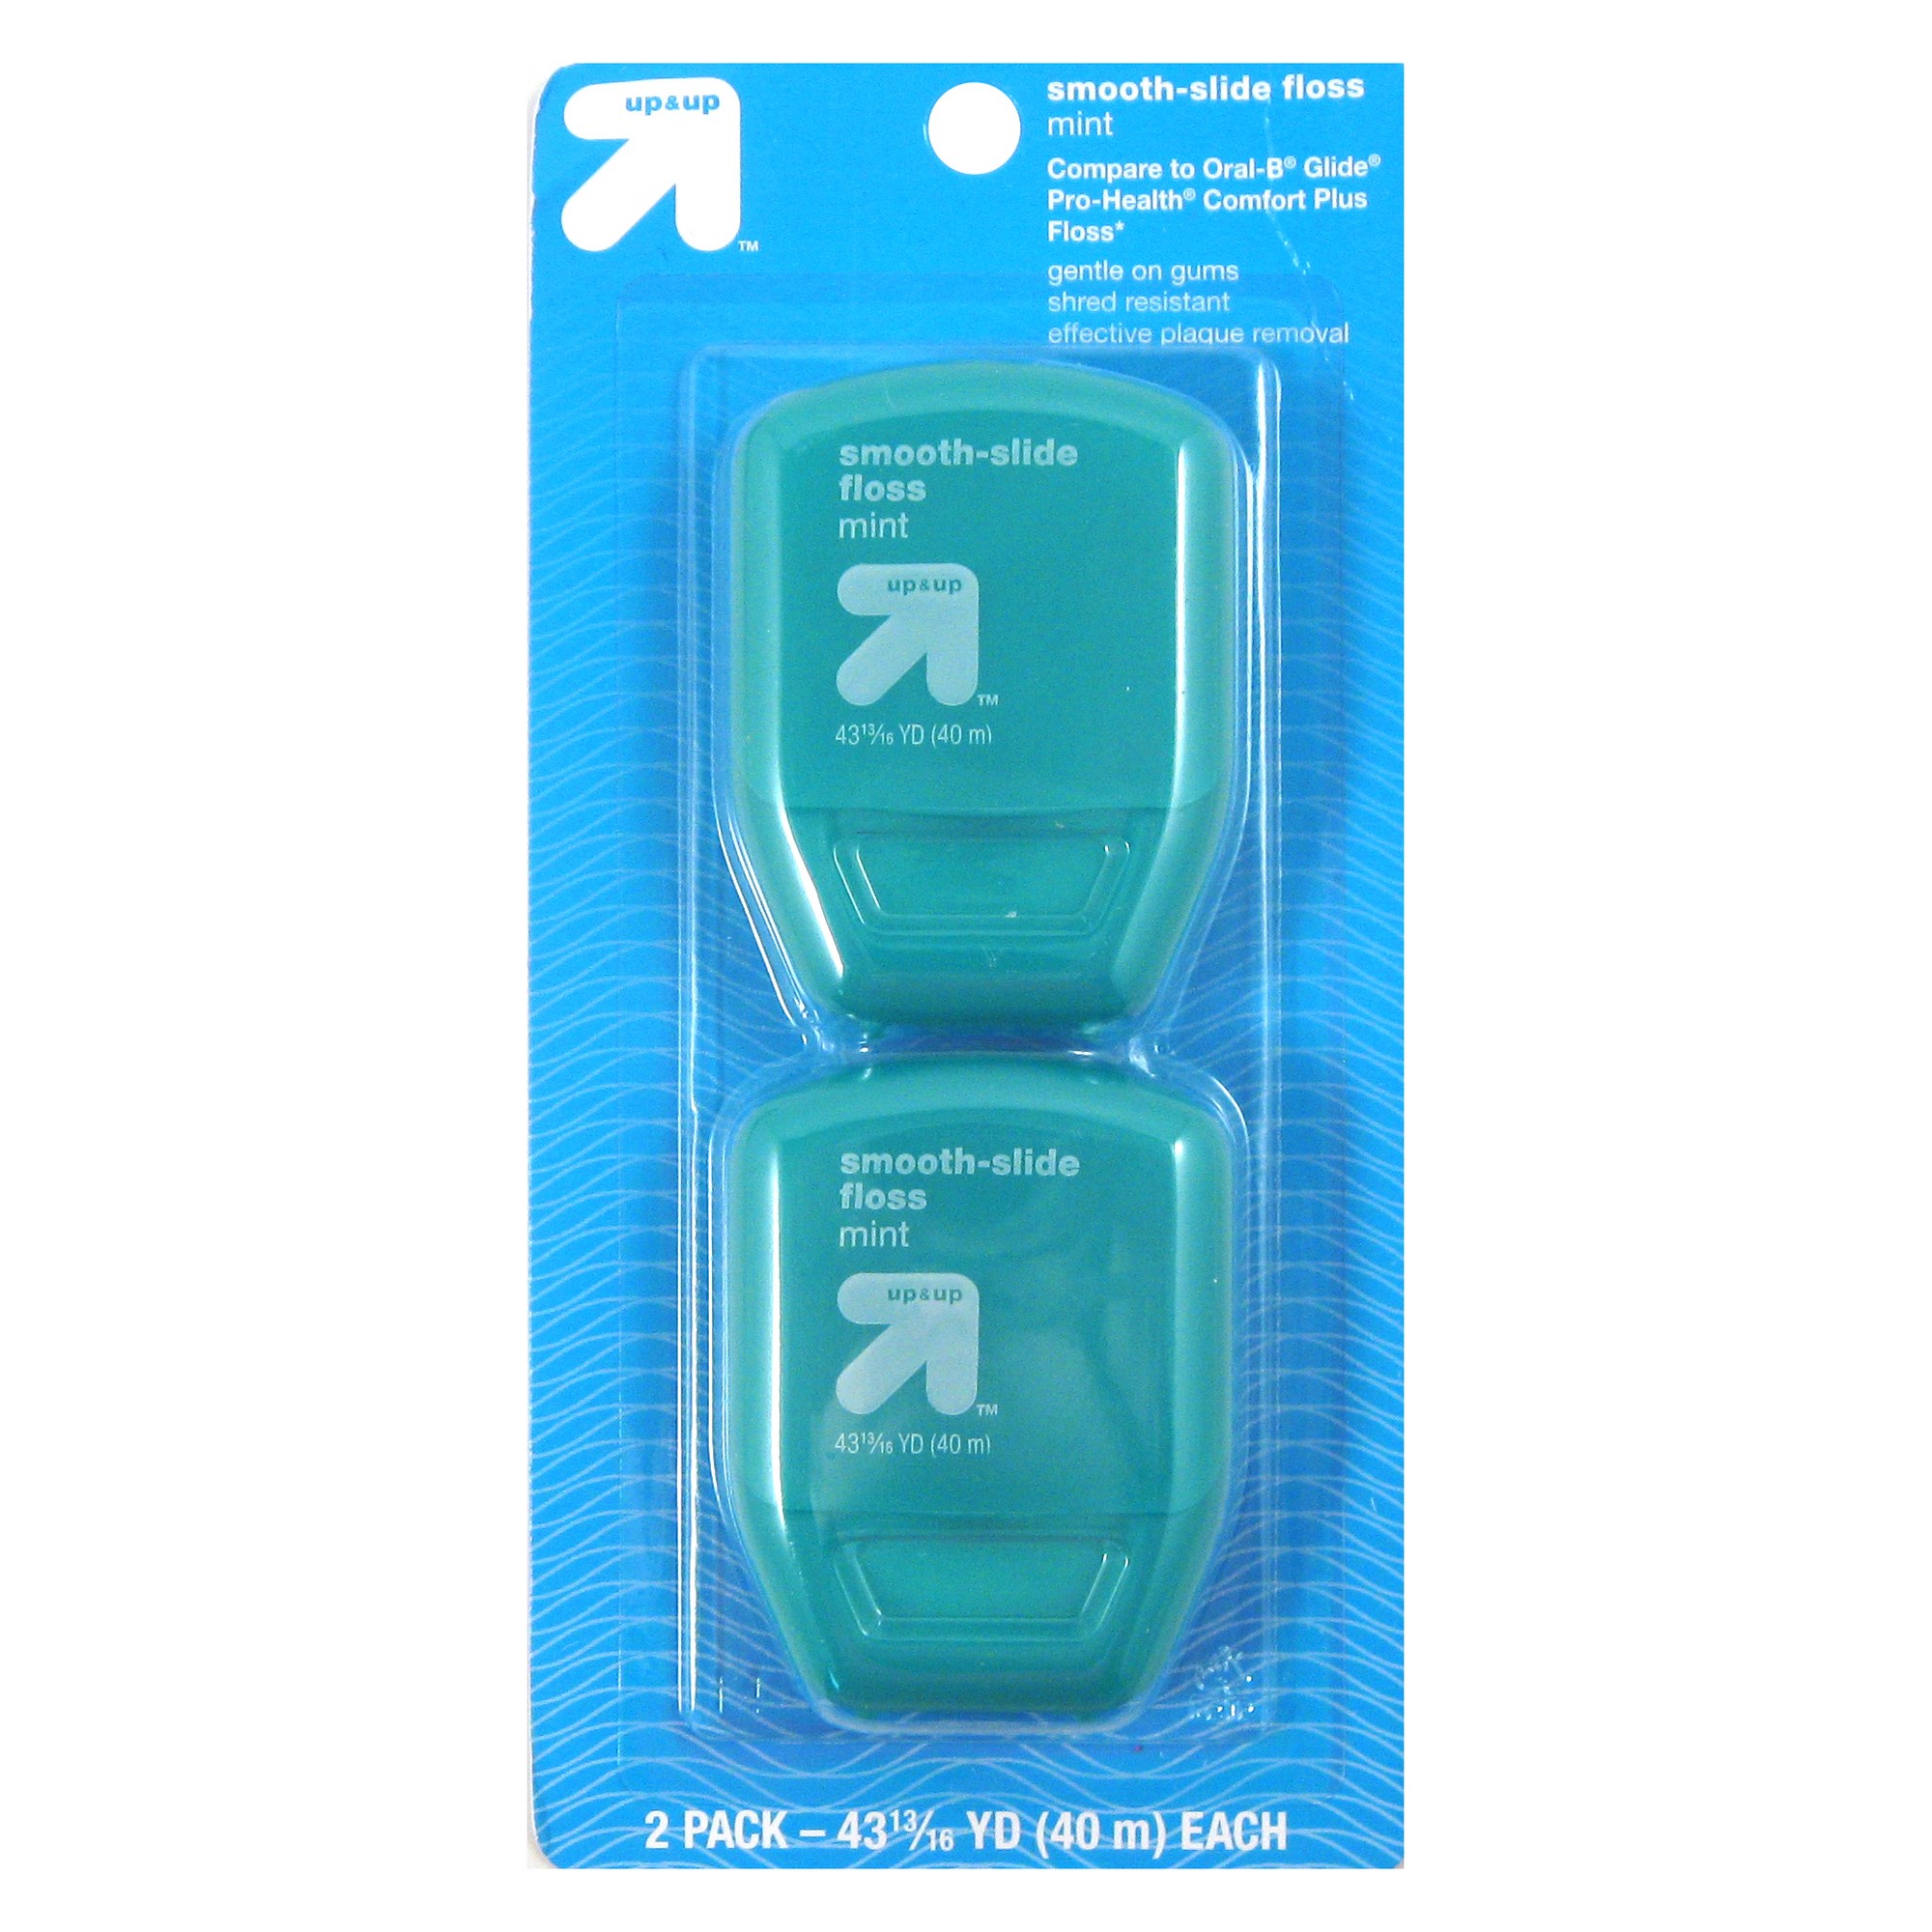 Smooth Slide Floss - 2pk - Up&Up (Compare to Oral-B Glide Pro Health Comfort plus Floss)